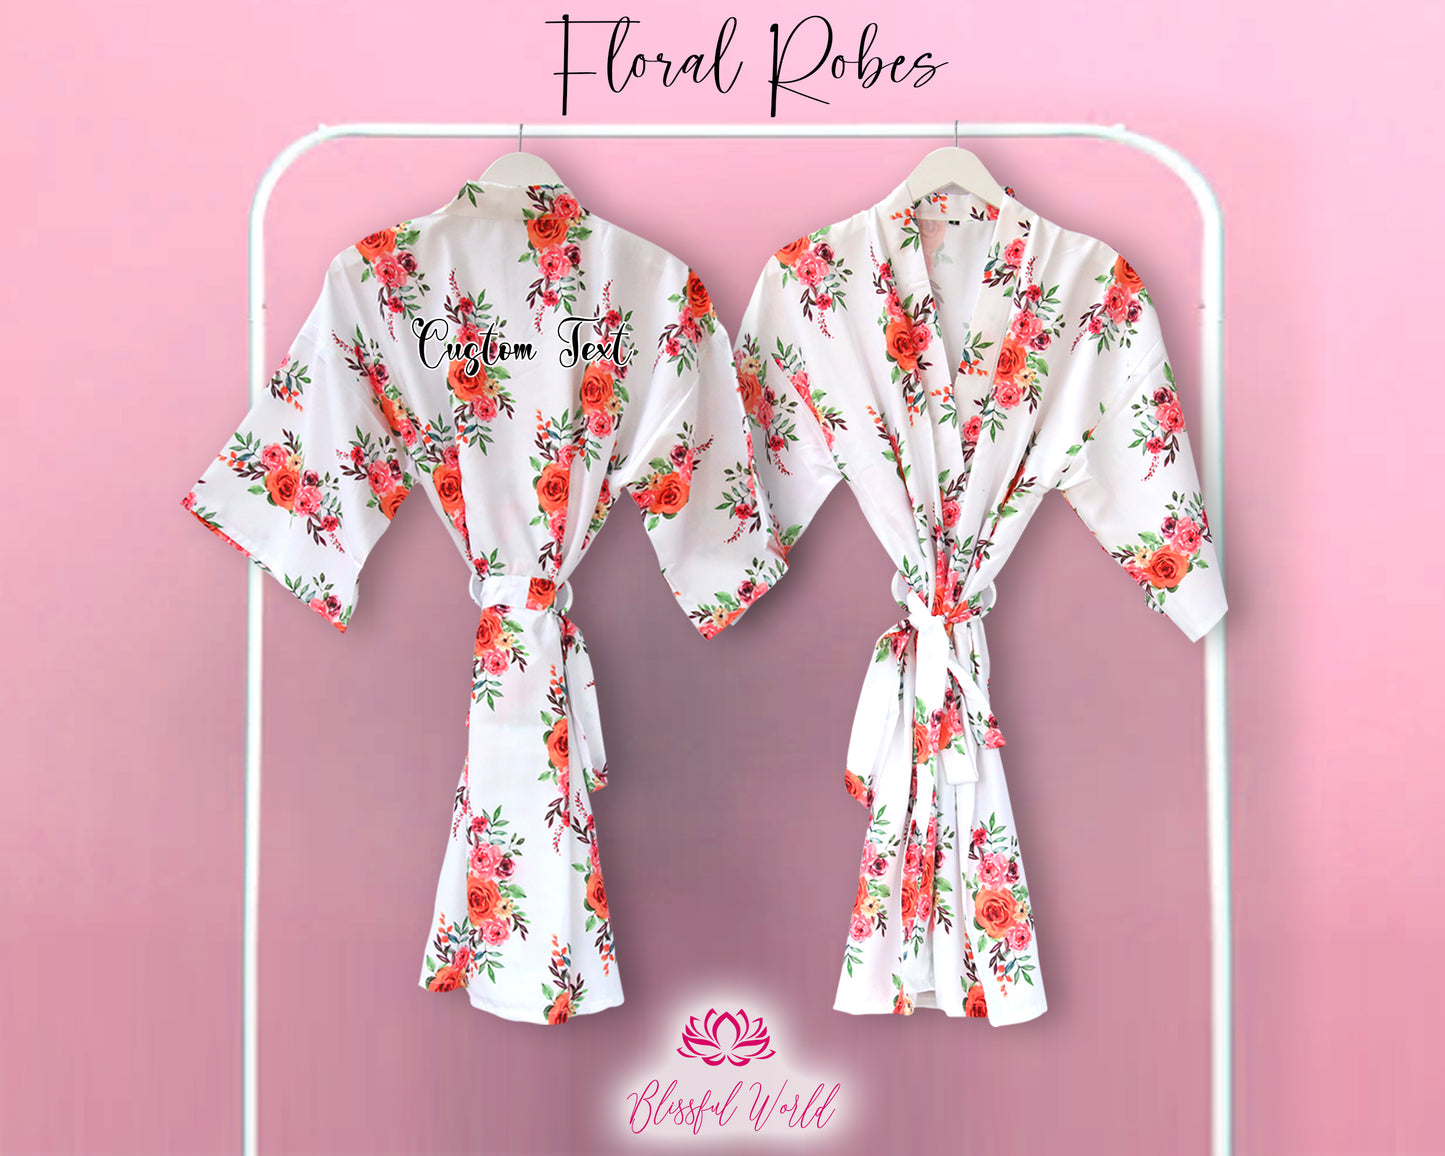 Customized Robes, Robe, Floral Robes, Floral Print Robes, Personalized Robes, Bridesmaid Robe, Birthday Gift, Bride to be, Gift for her, Satin Robes